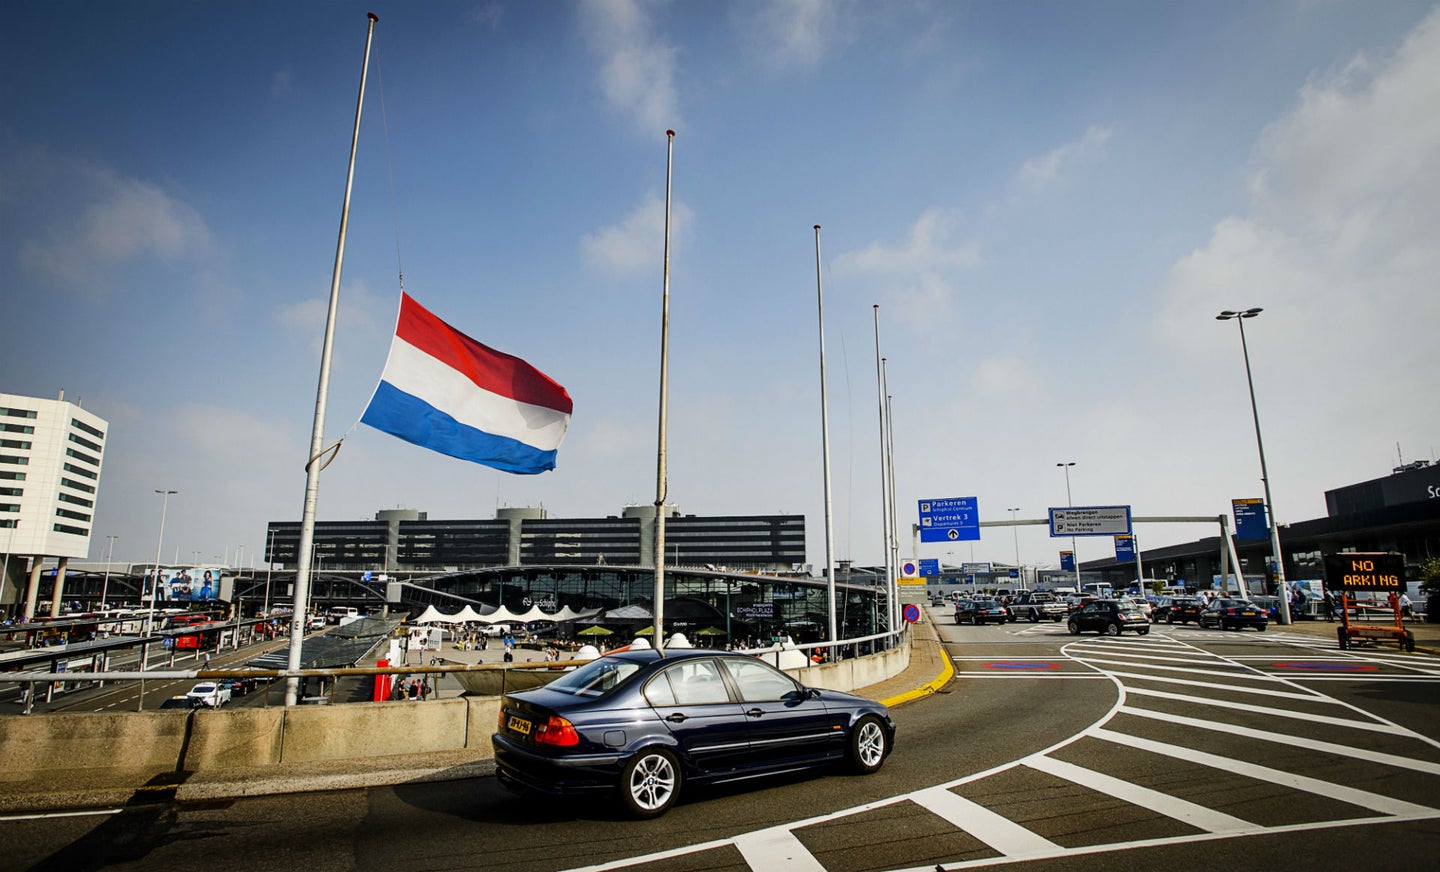 Amsterdam to Ban Gasoline and Diesel Vehicles Completely by 2030 to Curb Air Pollution